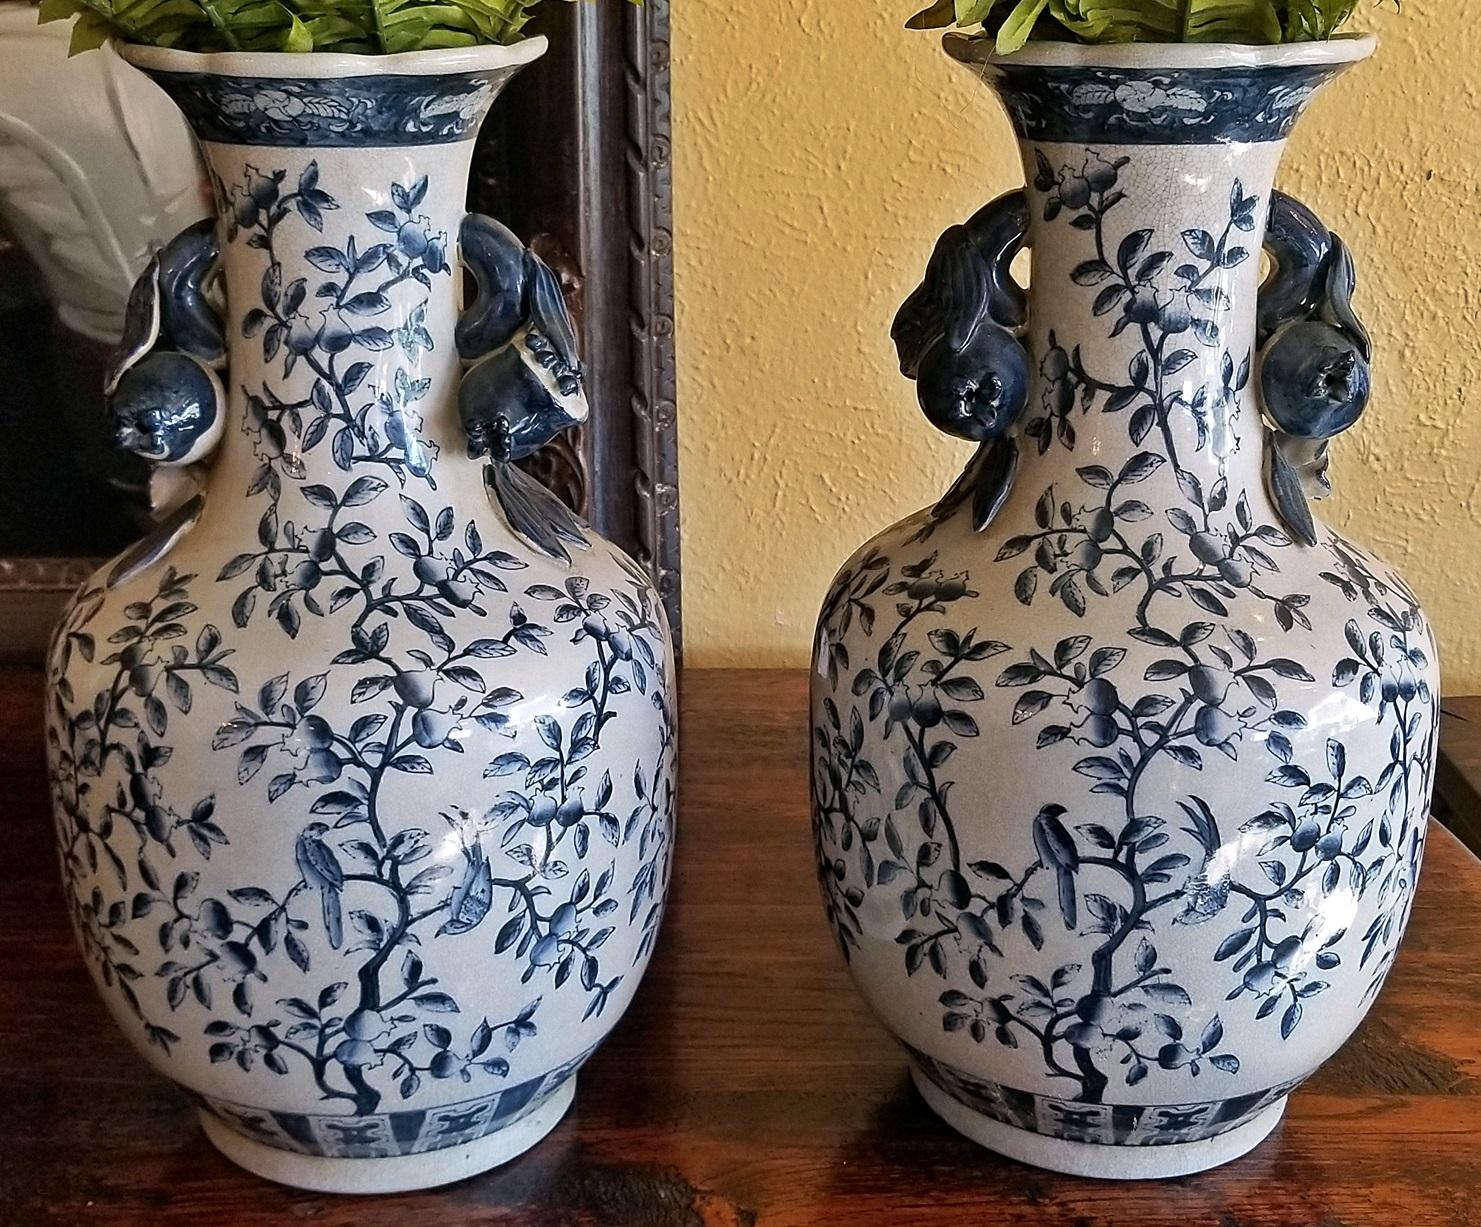 Nice pair of large 19th century ironstone blue and white floor vases made in Staffordshire, Britain in the Chinese style.

Trailing foliage with birds on each.

Large tulip style handles on each.

Natural crazing indicates age.

Made circa